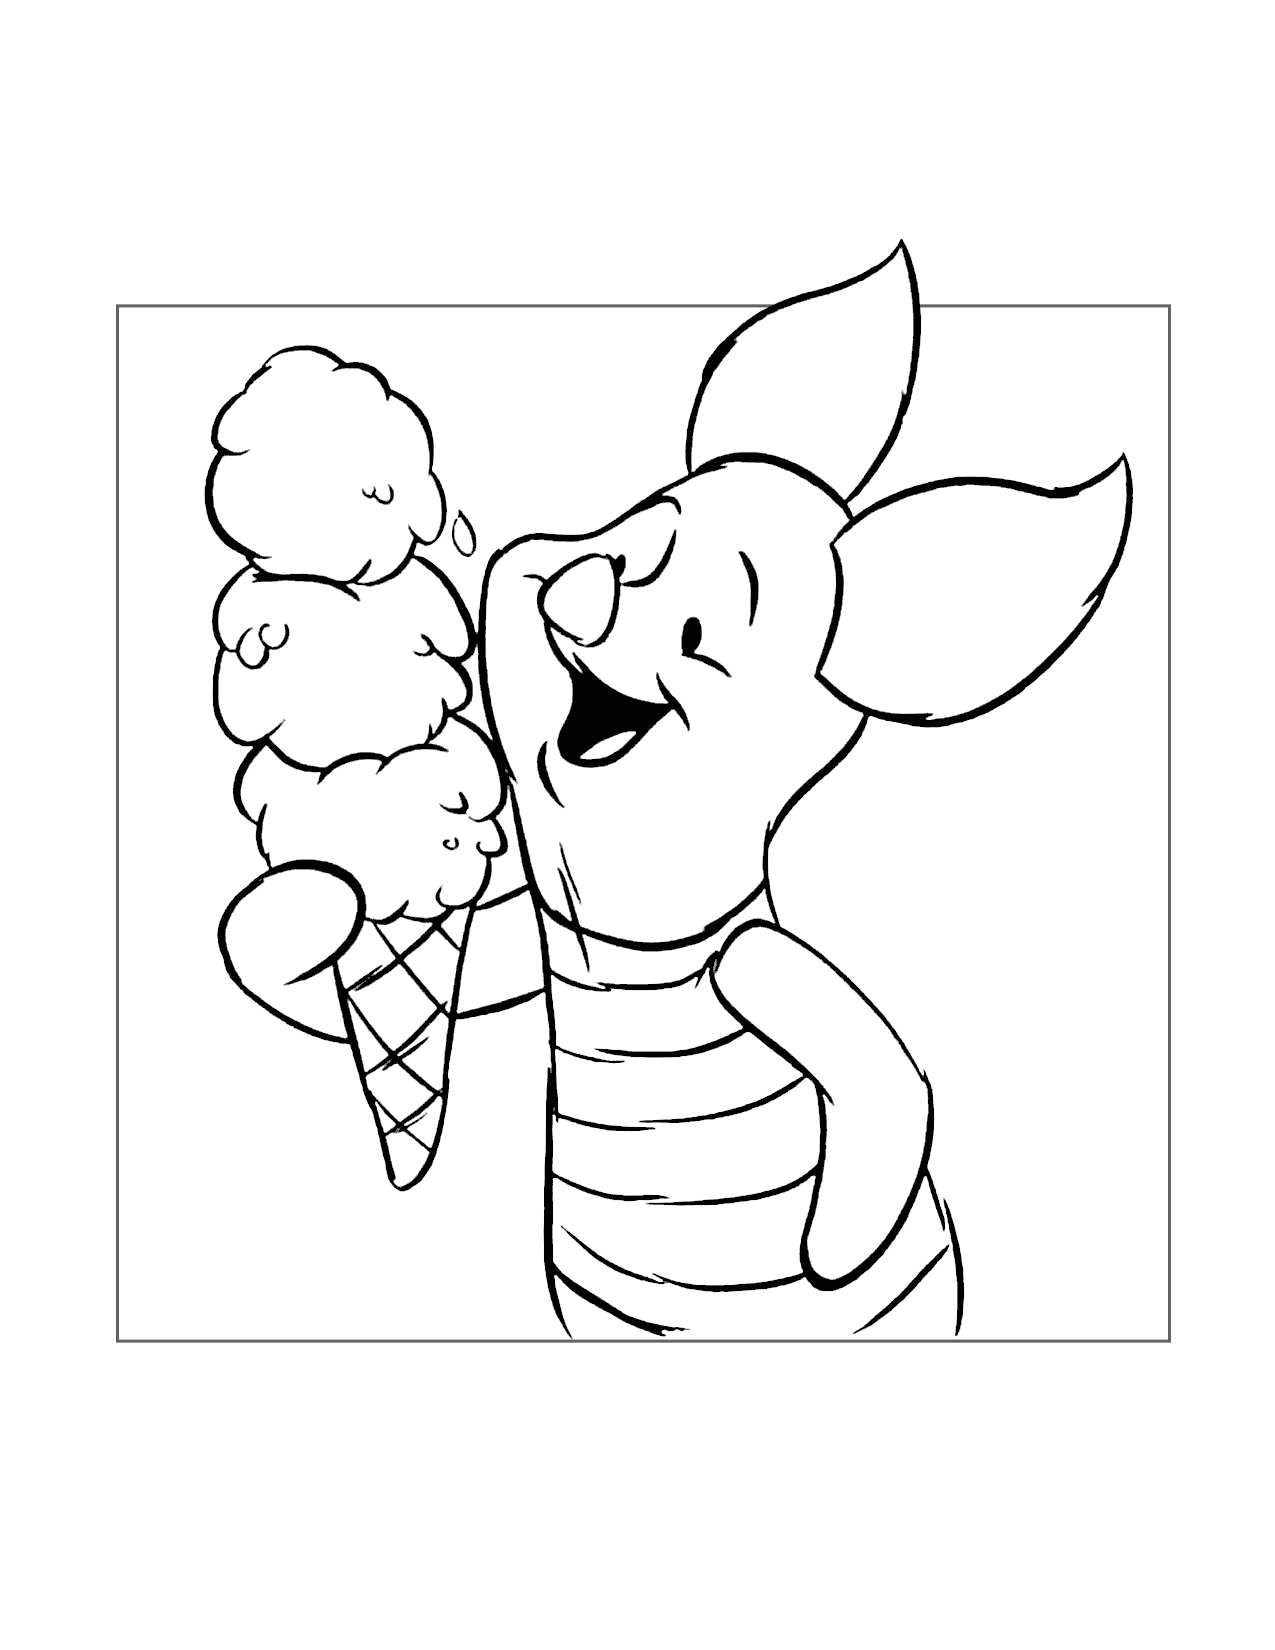 Piglet Eats Ice Cream Coloring Page